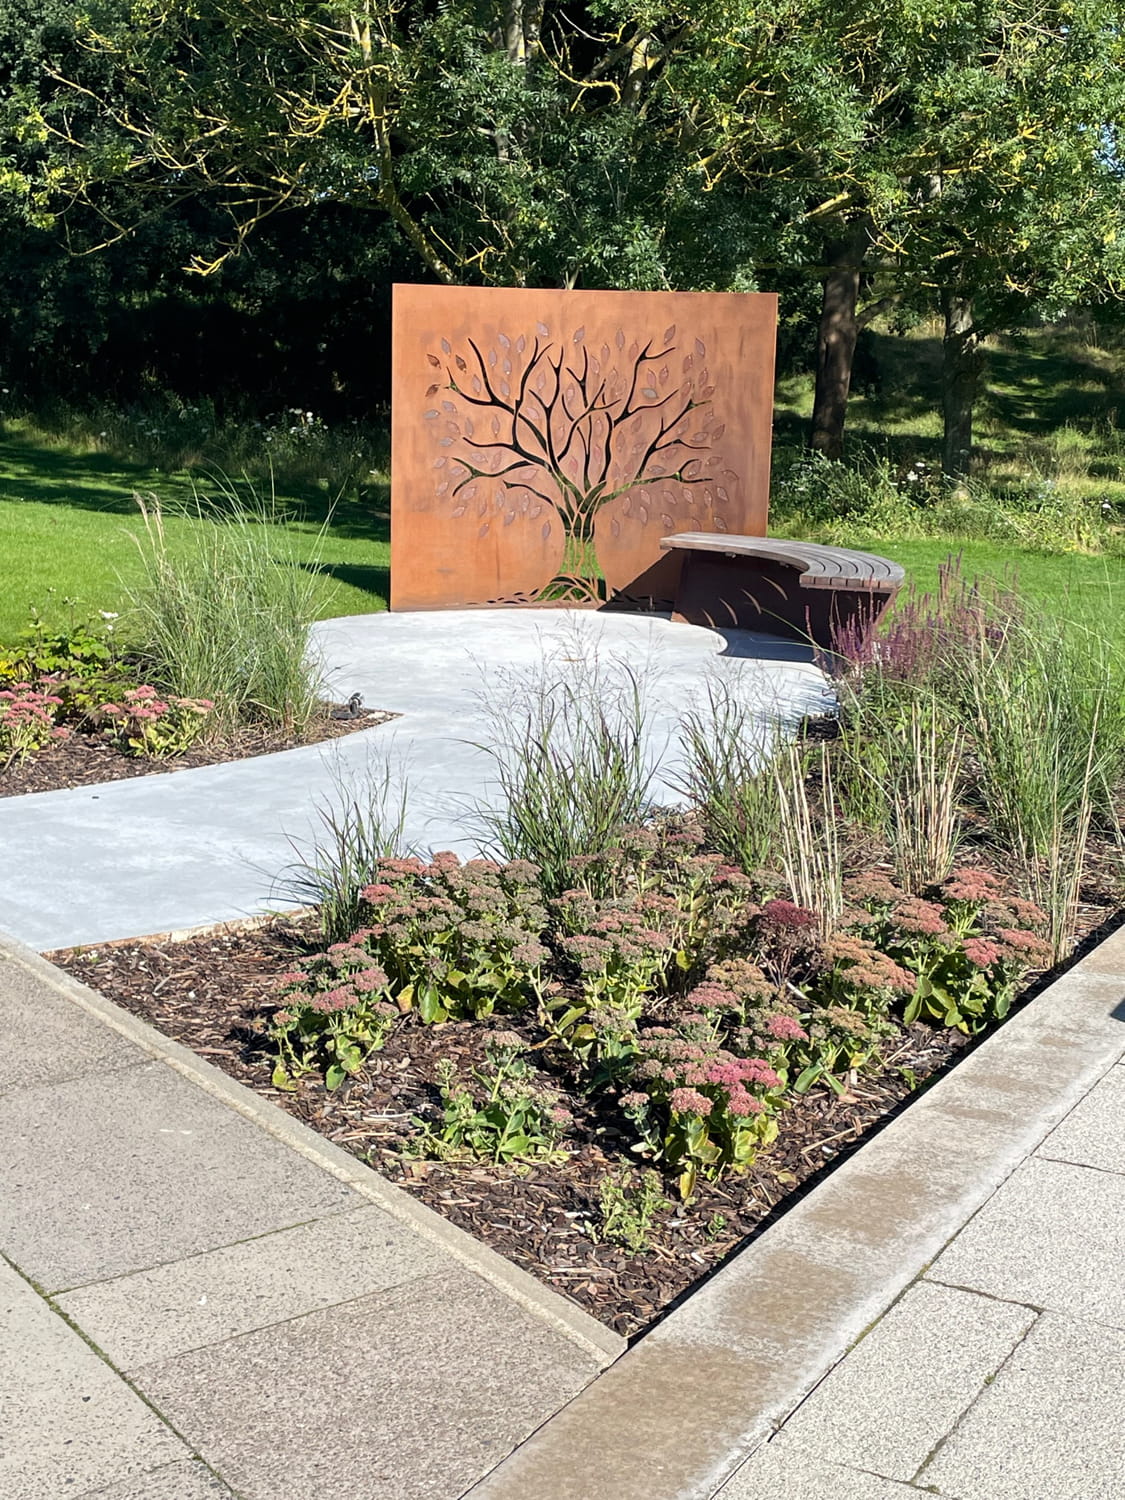 Our Tree of Life memorial in the sunshine. A curved bench and tree cut from a metal wall by the lake.